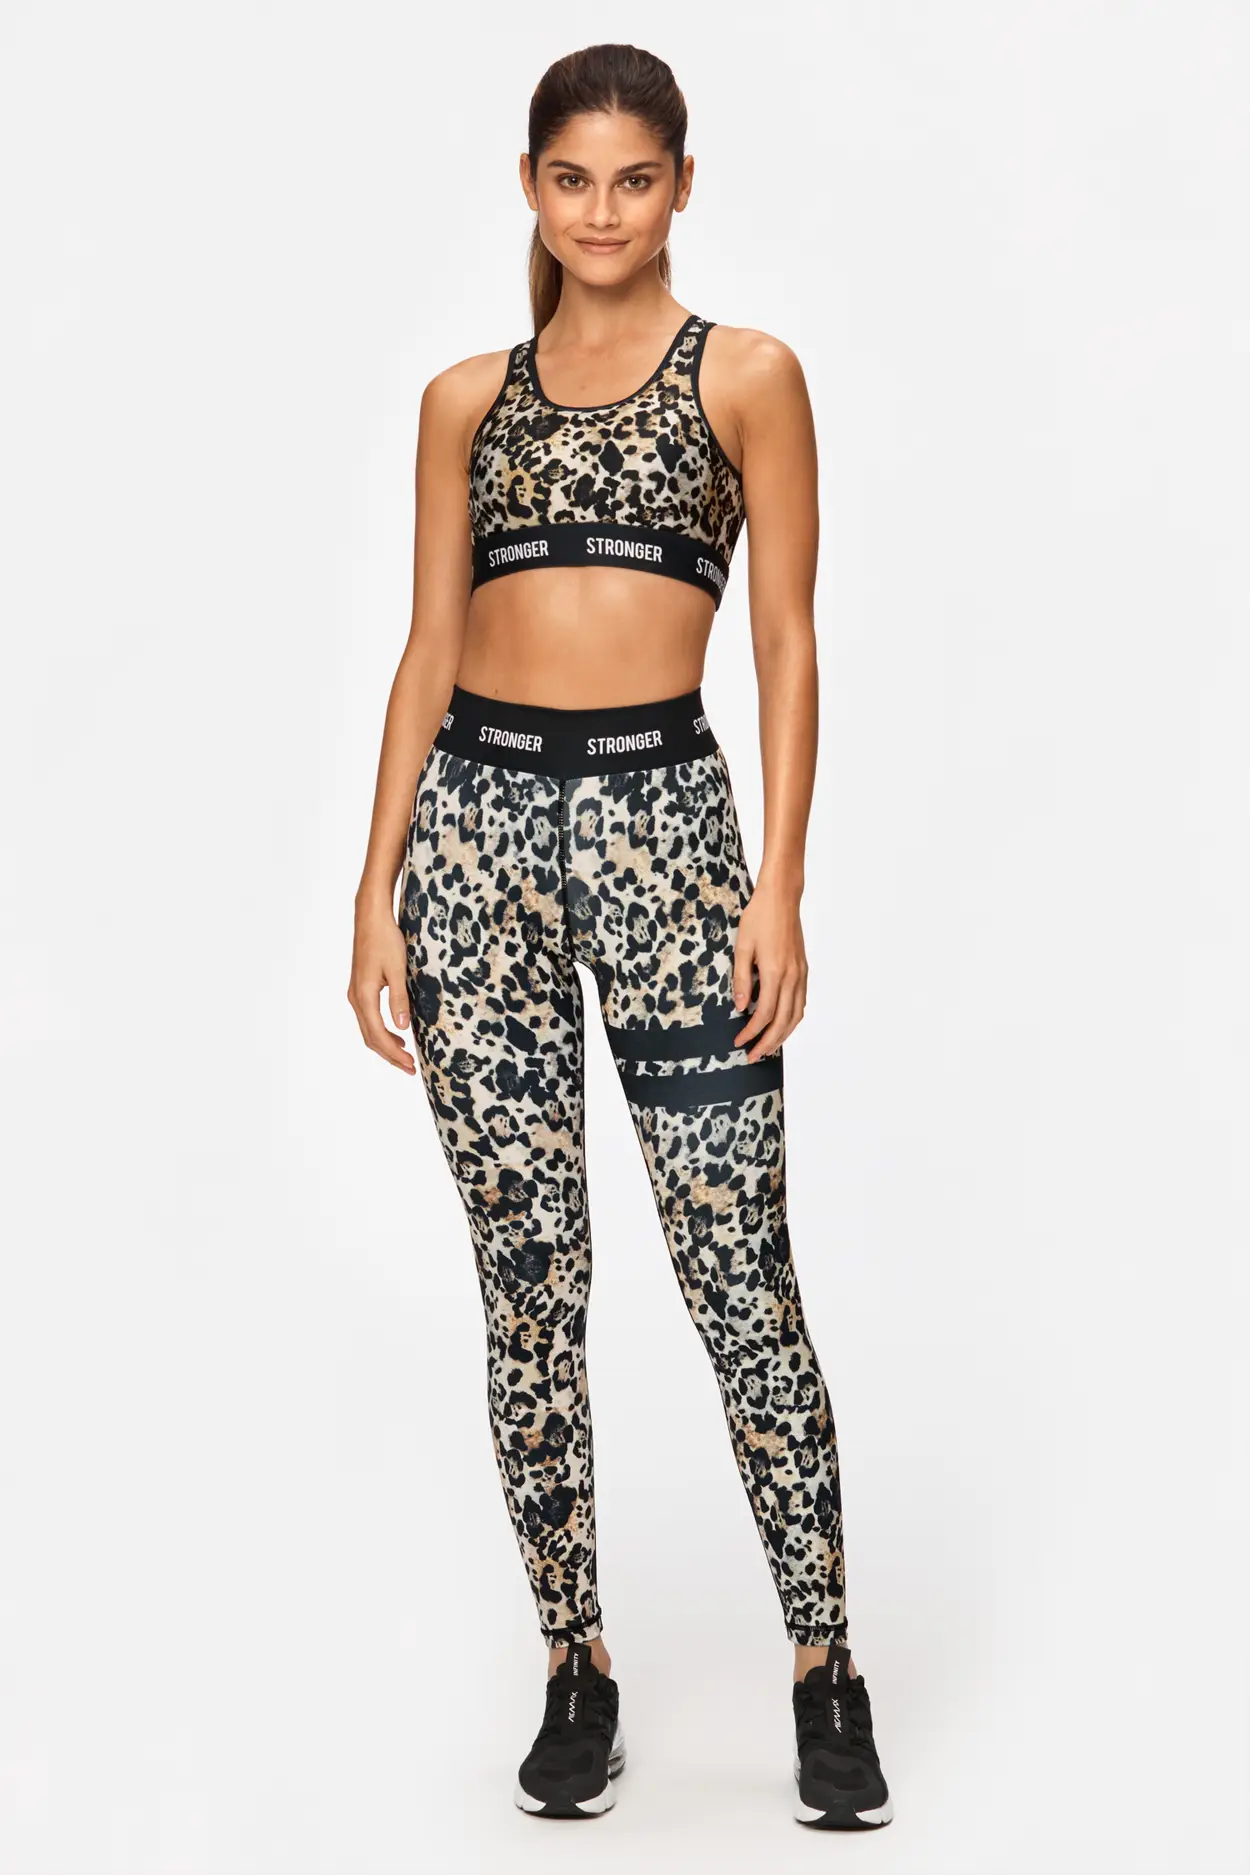 Leopard leggings are super wearable—here are 11 to try